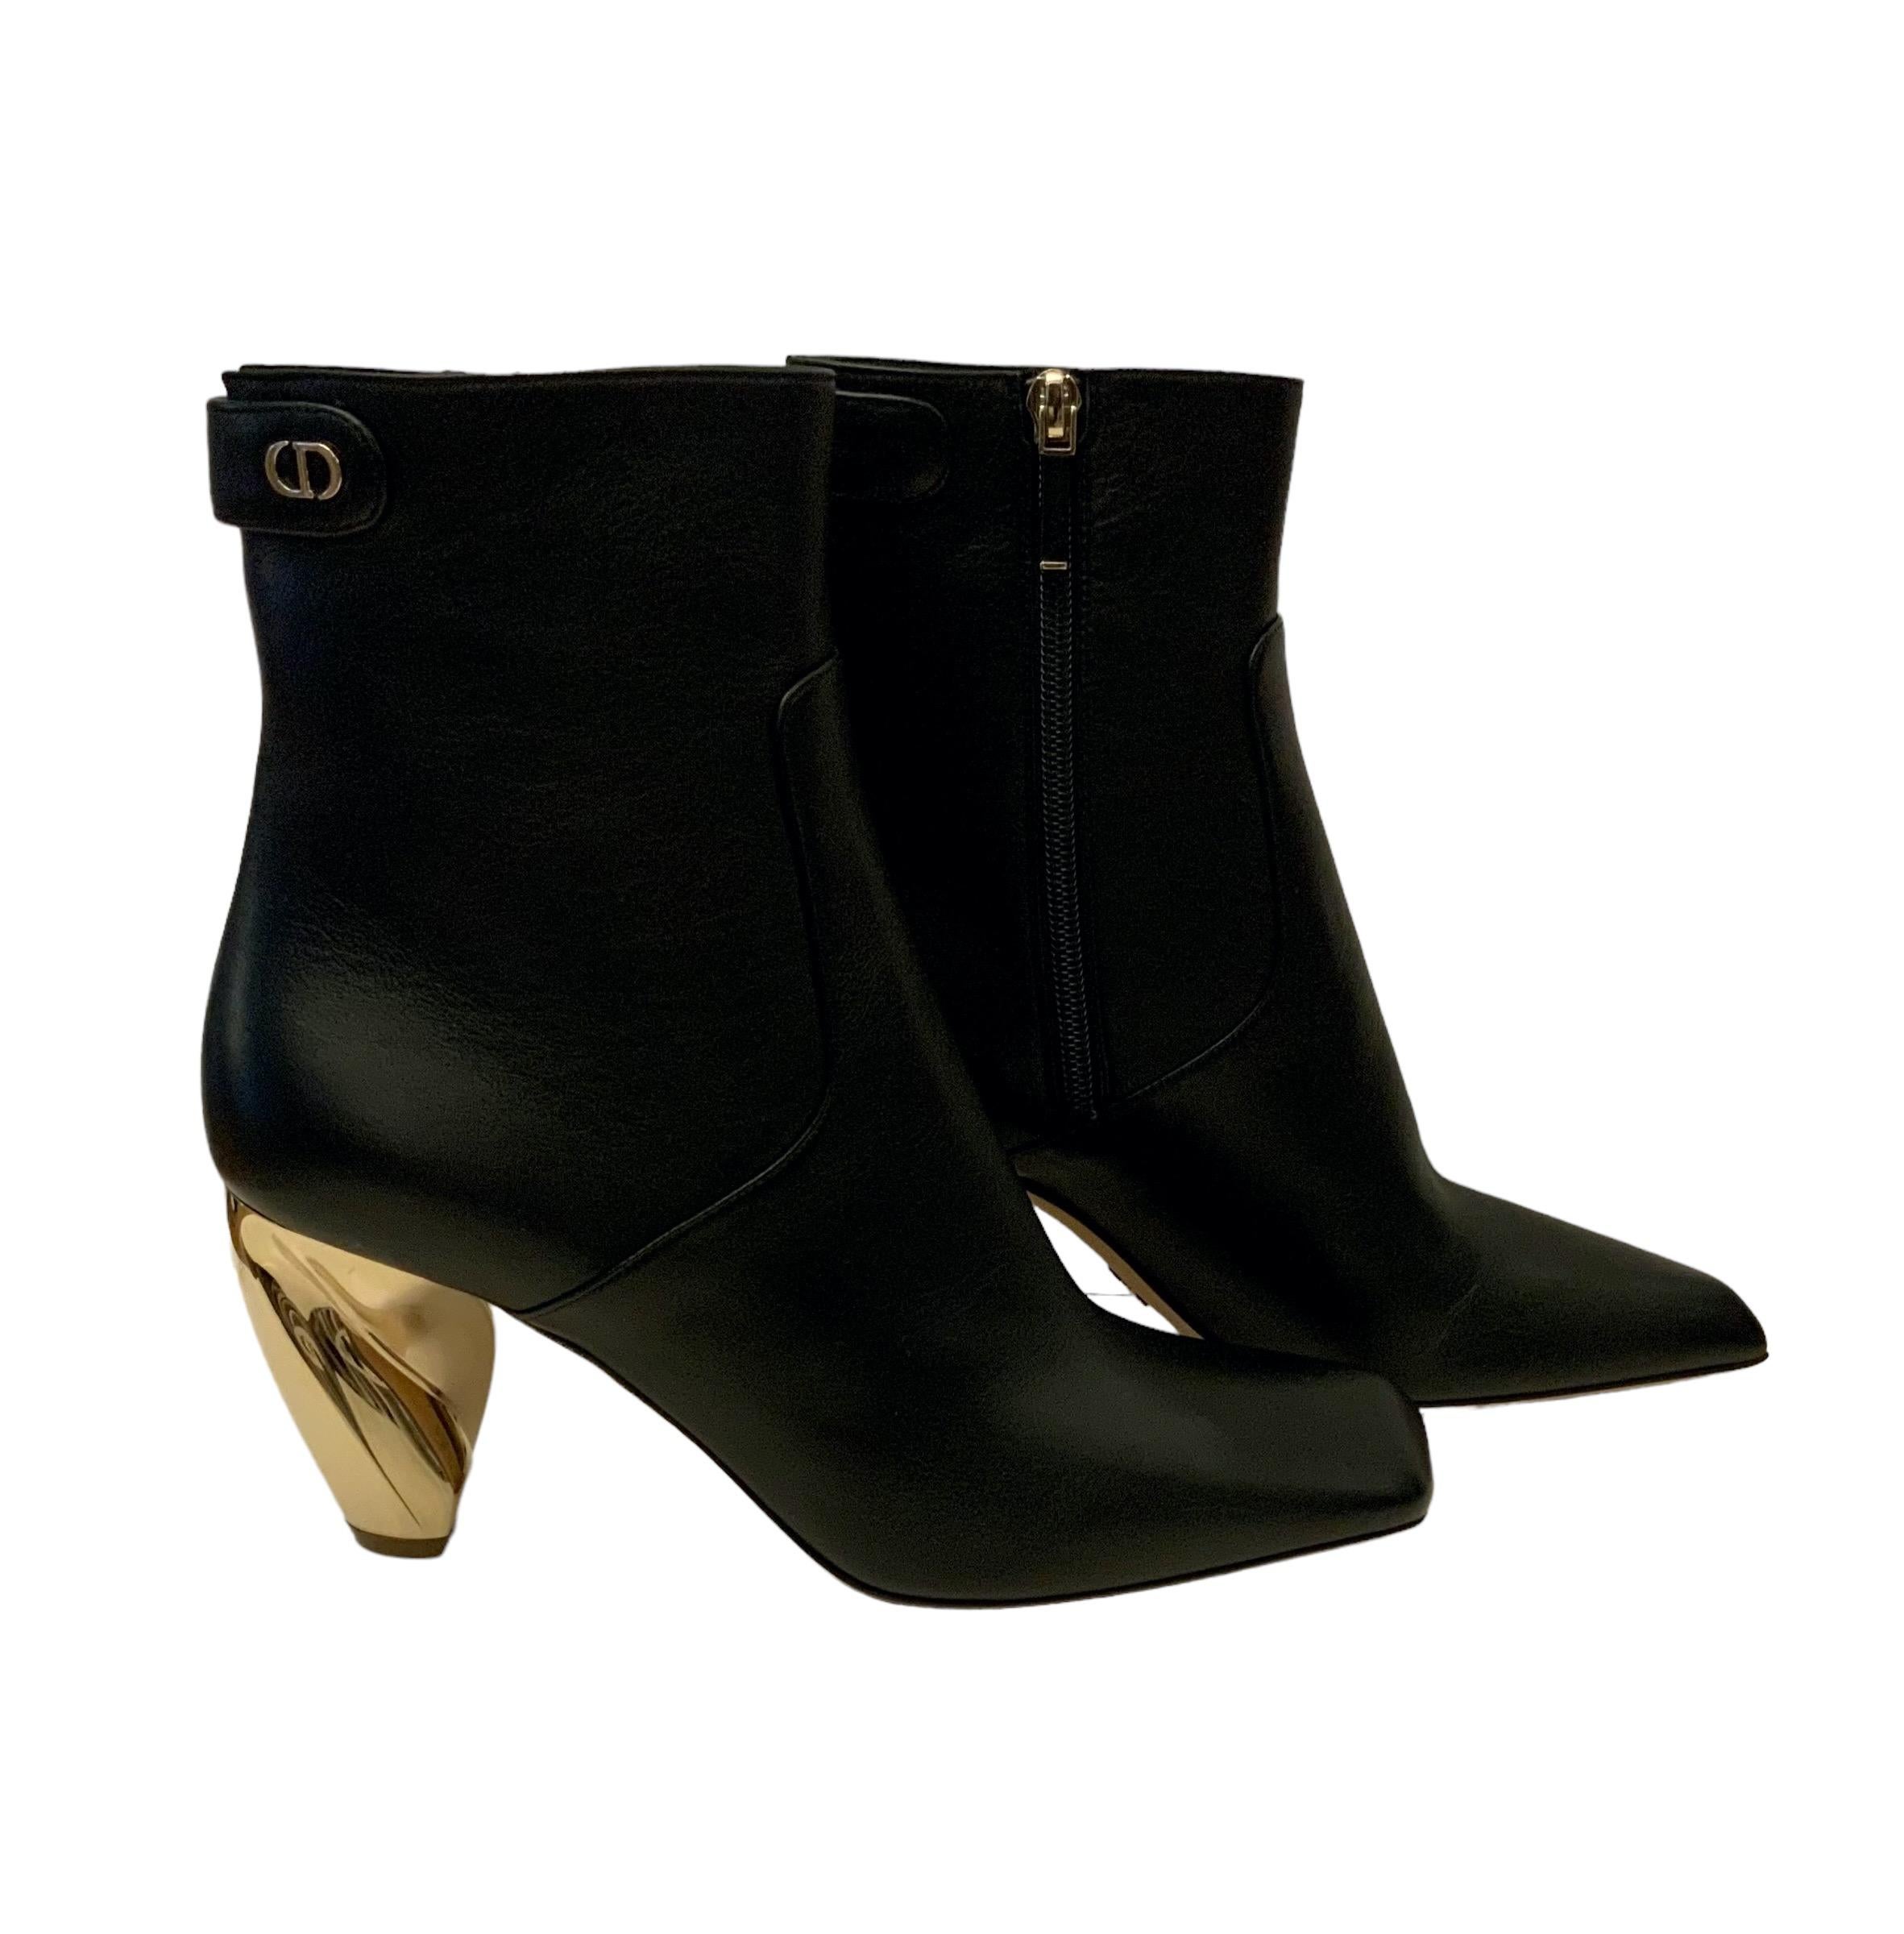 From the SS 22 collection, Maria Grazia Chiuri is reinterpreting a classic style of the CD house.
These pre-owned but new Rhodes heeled ankle boots are crafted in a black soft Calfskin leather.
They feature a gold-finish architectural heel inspired